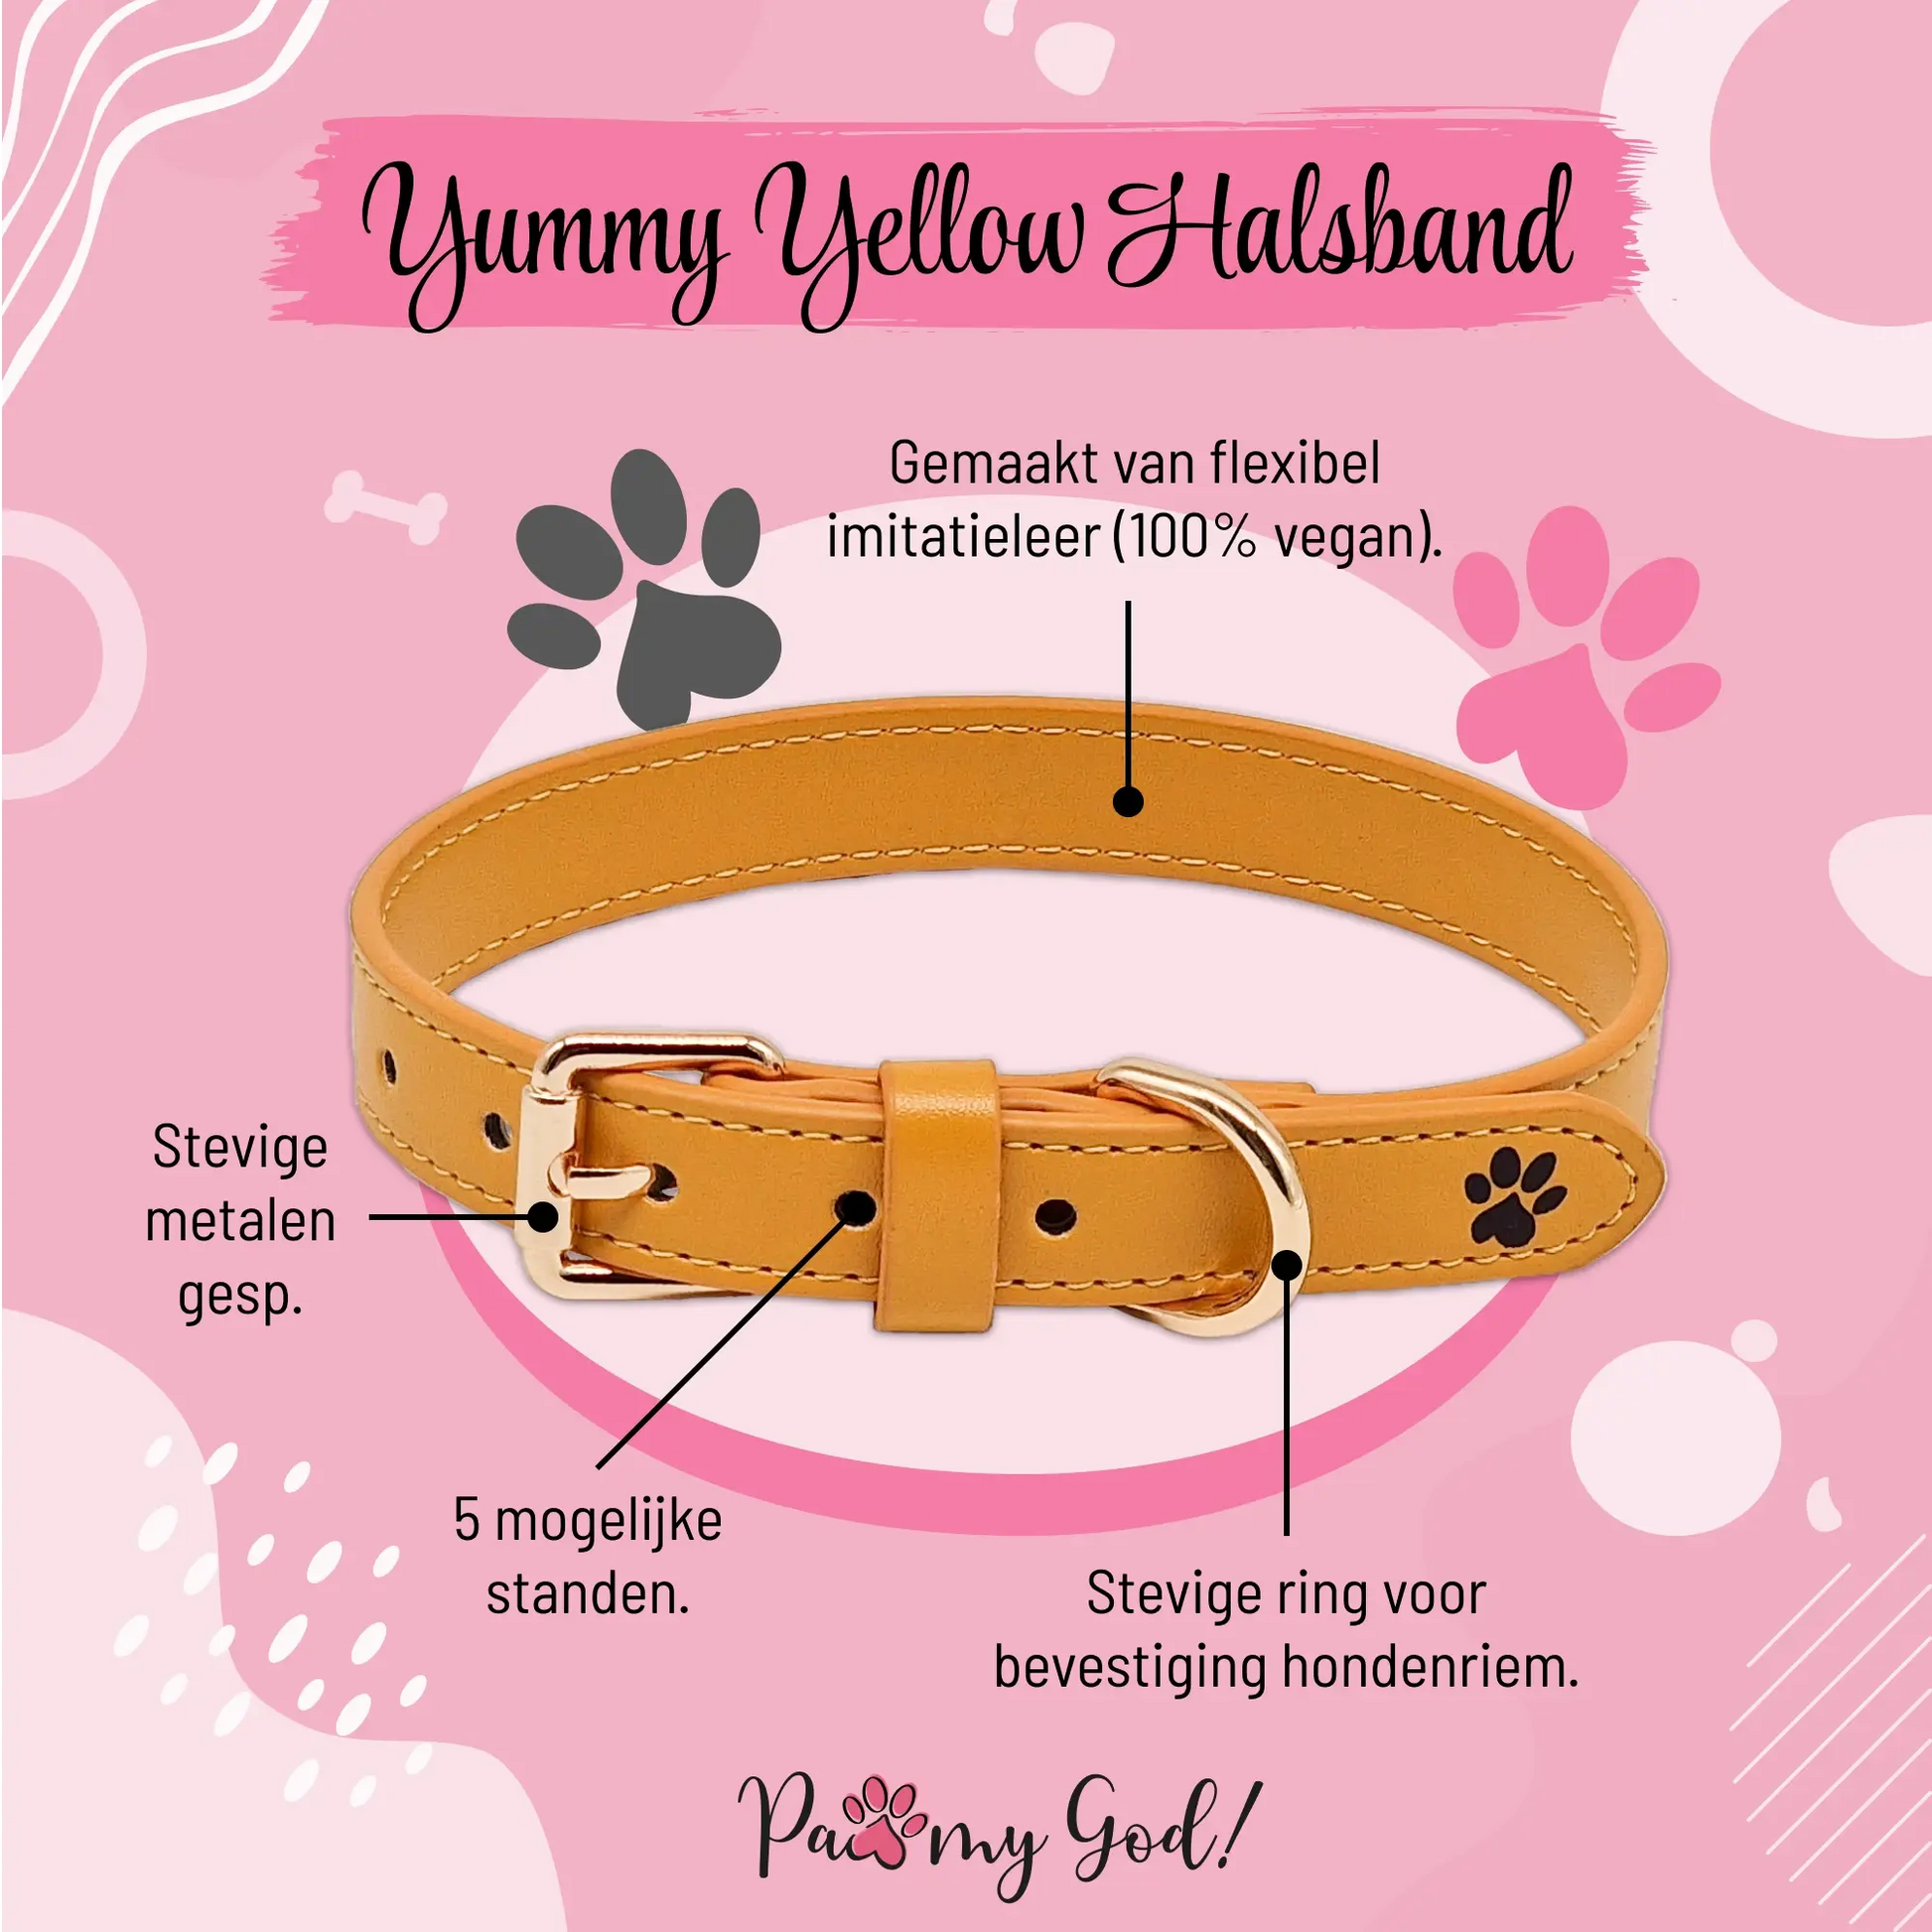 Yummy Yellow Leather Collar Features